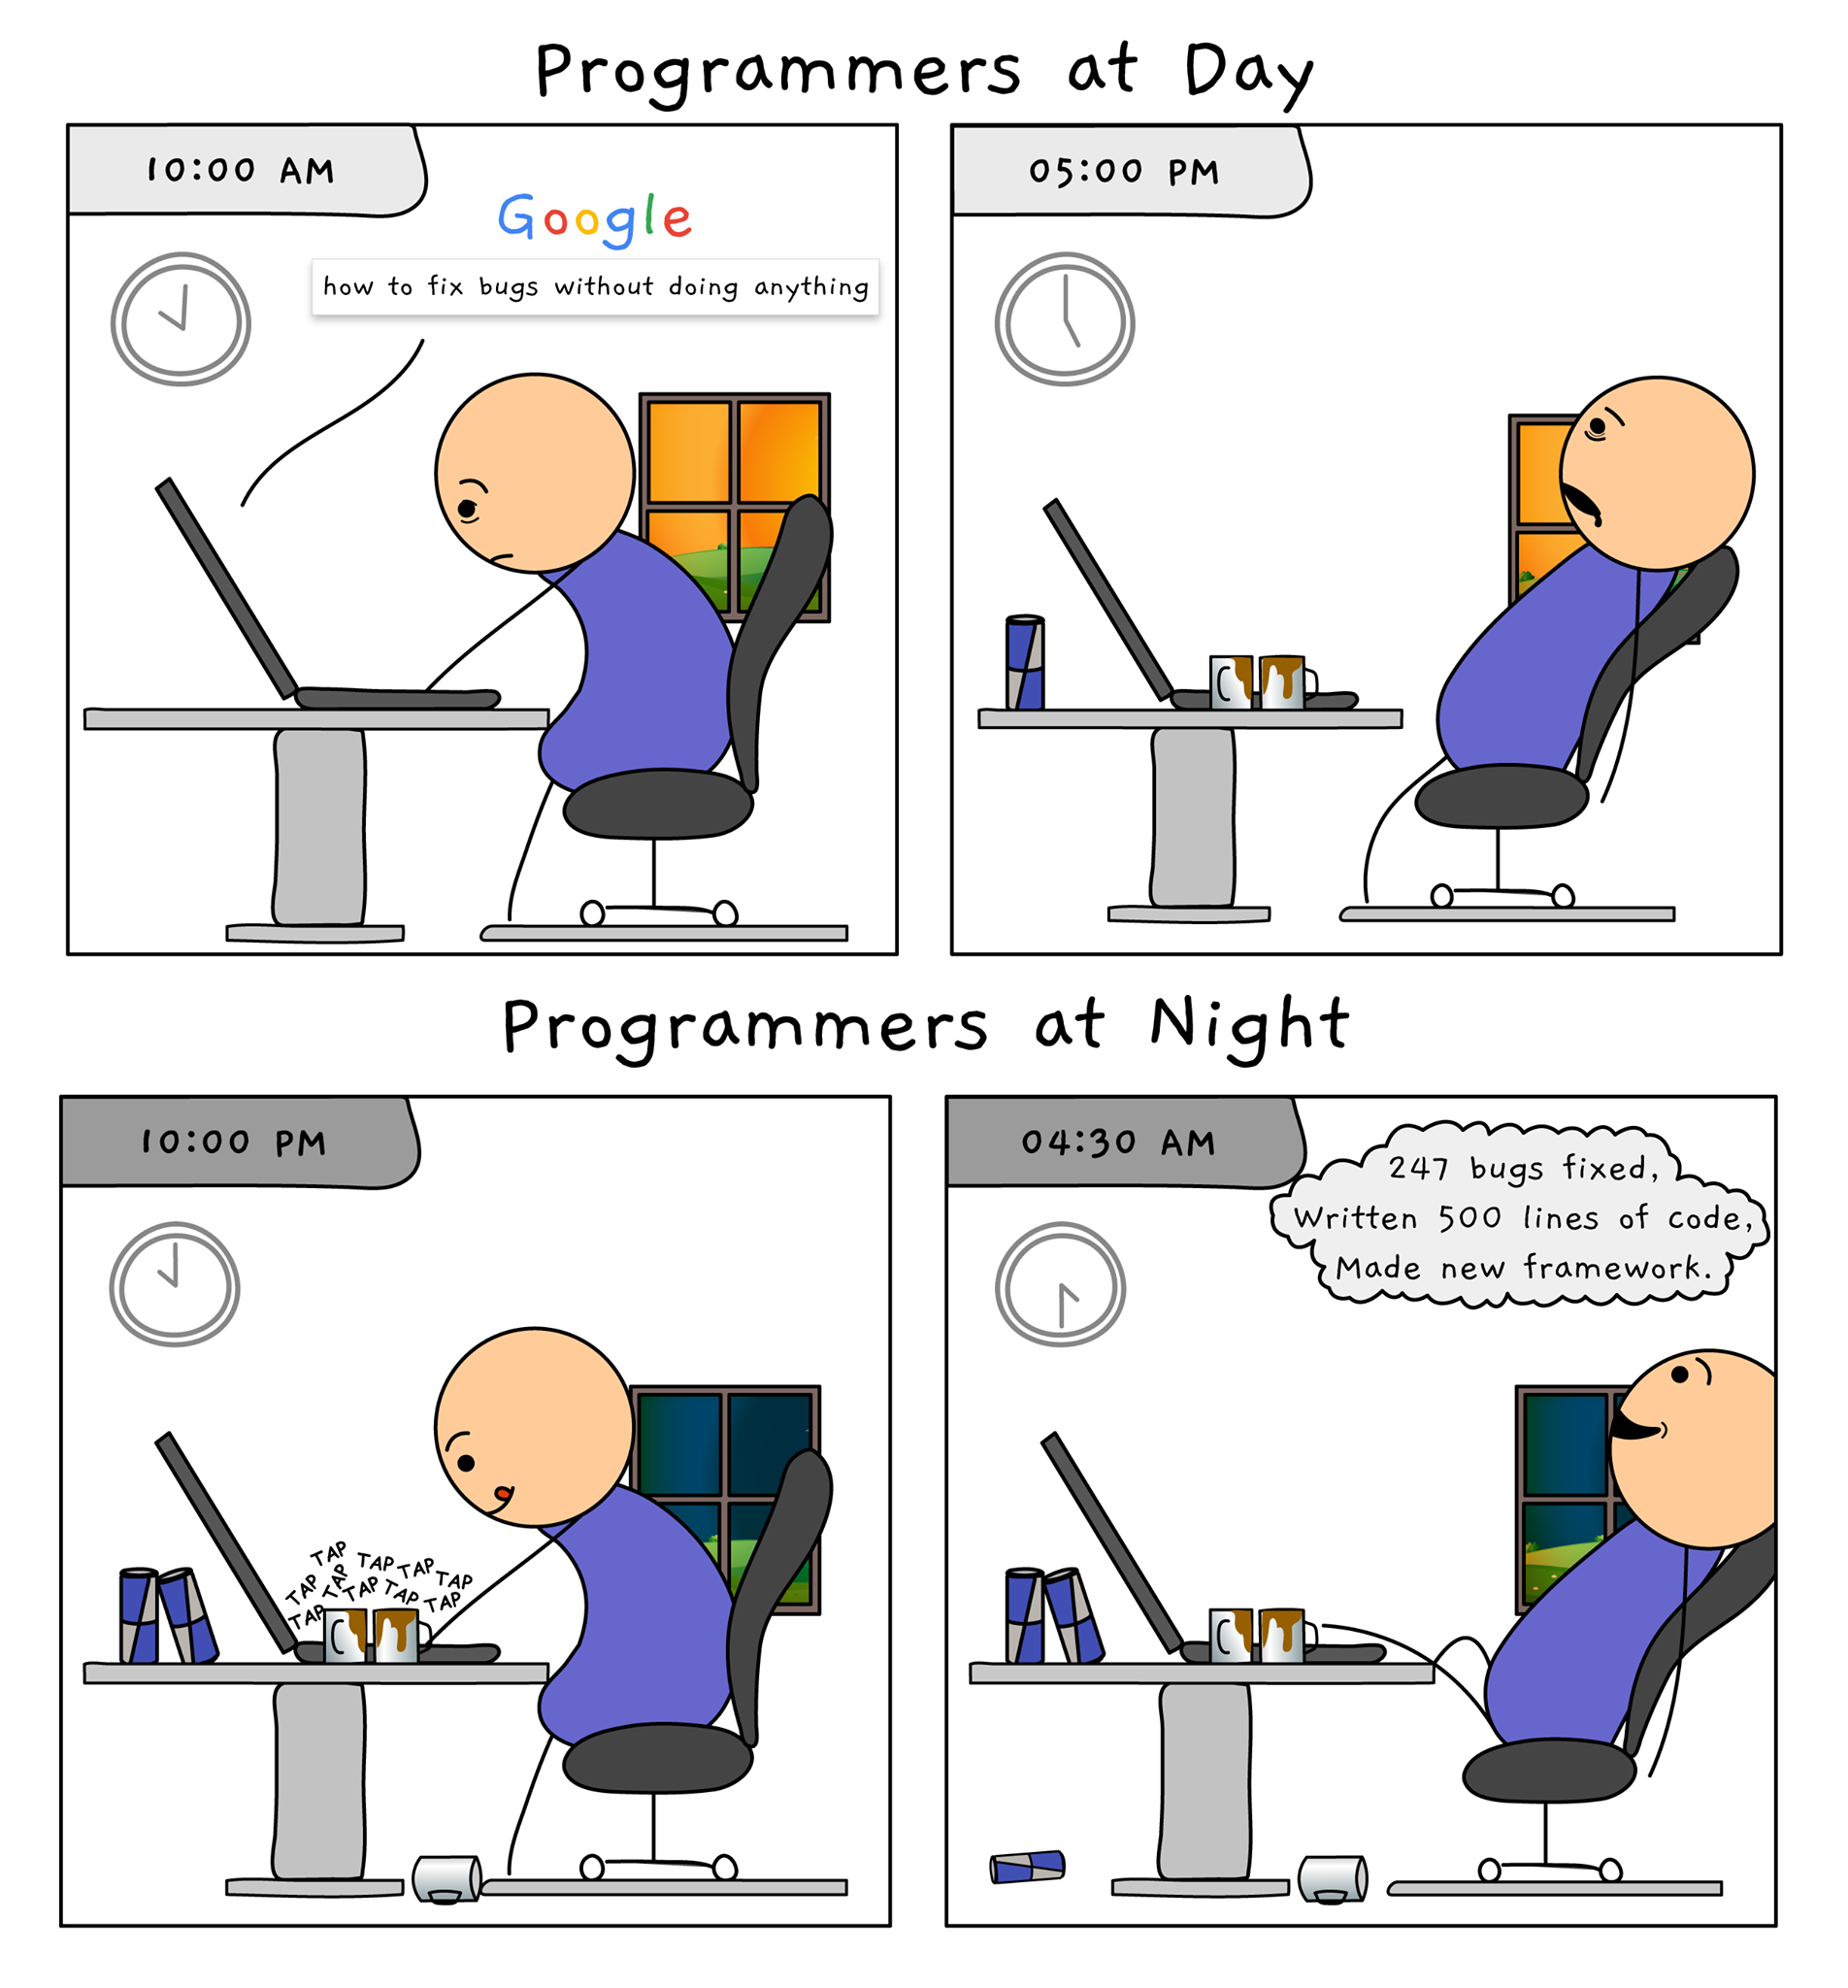 Programmers at day vs Programmers at night